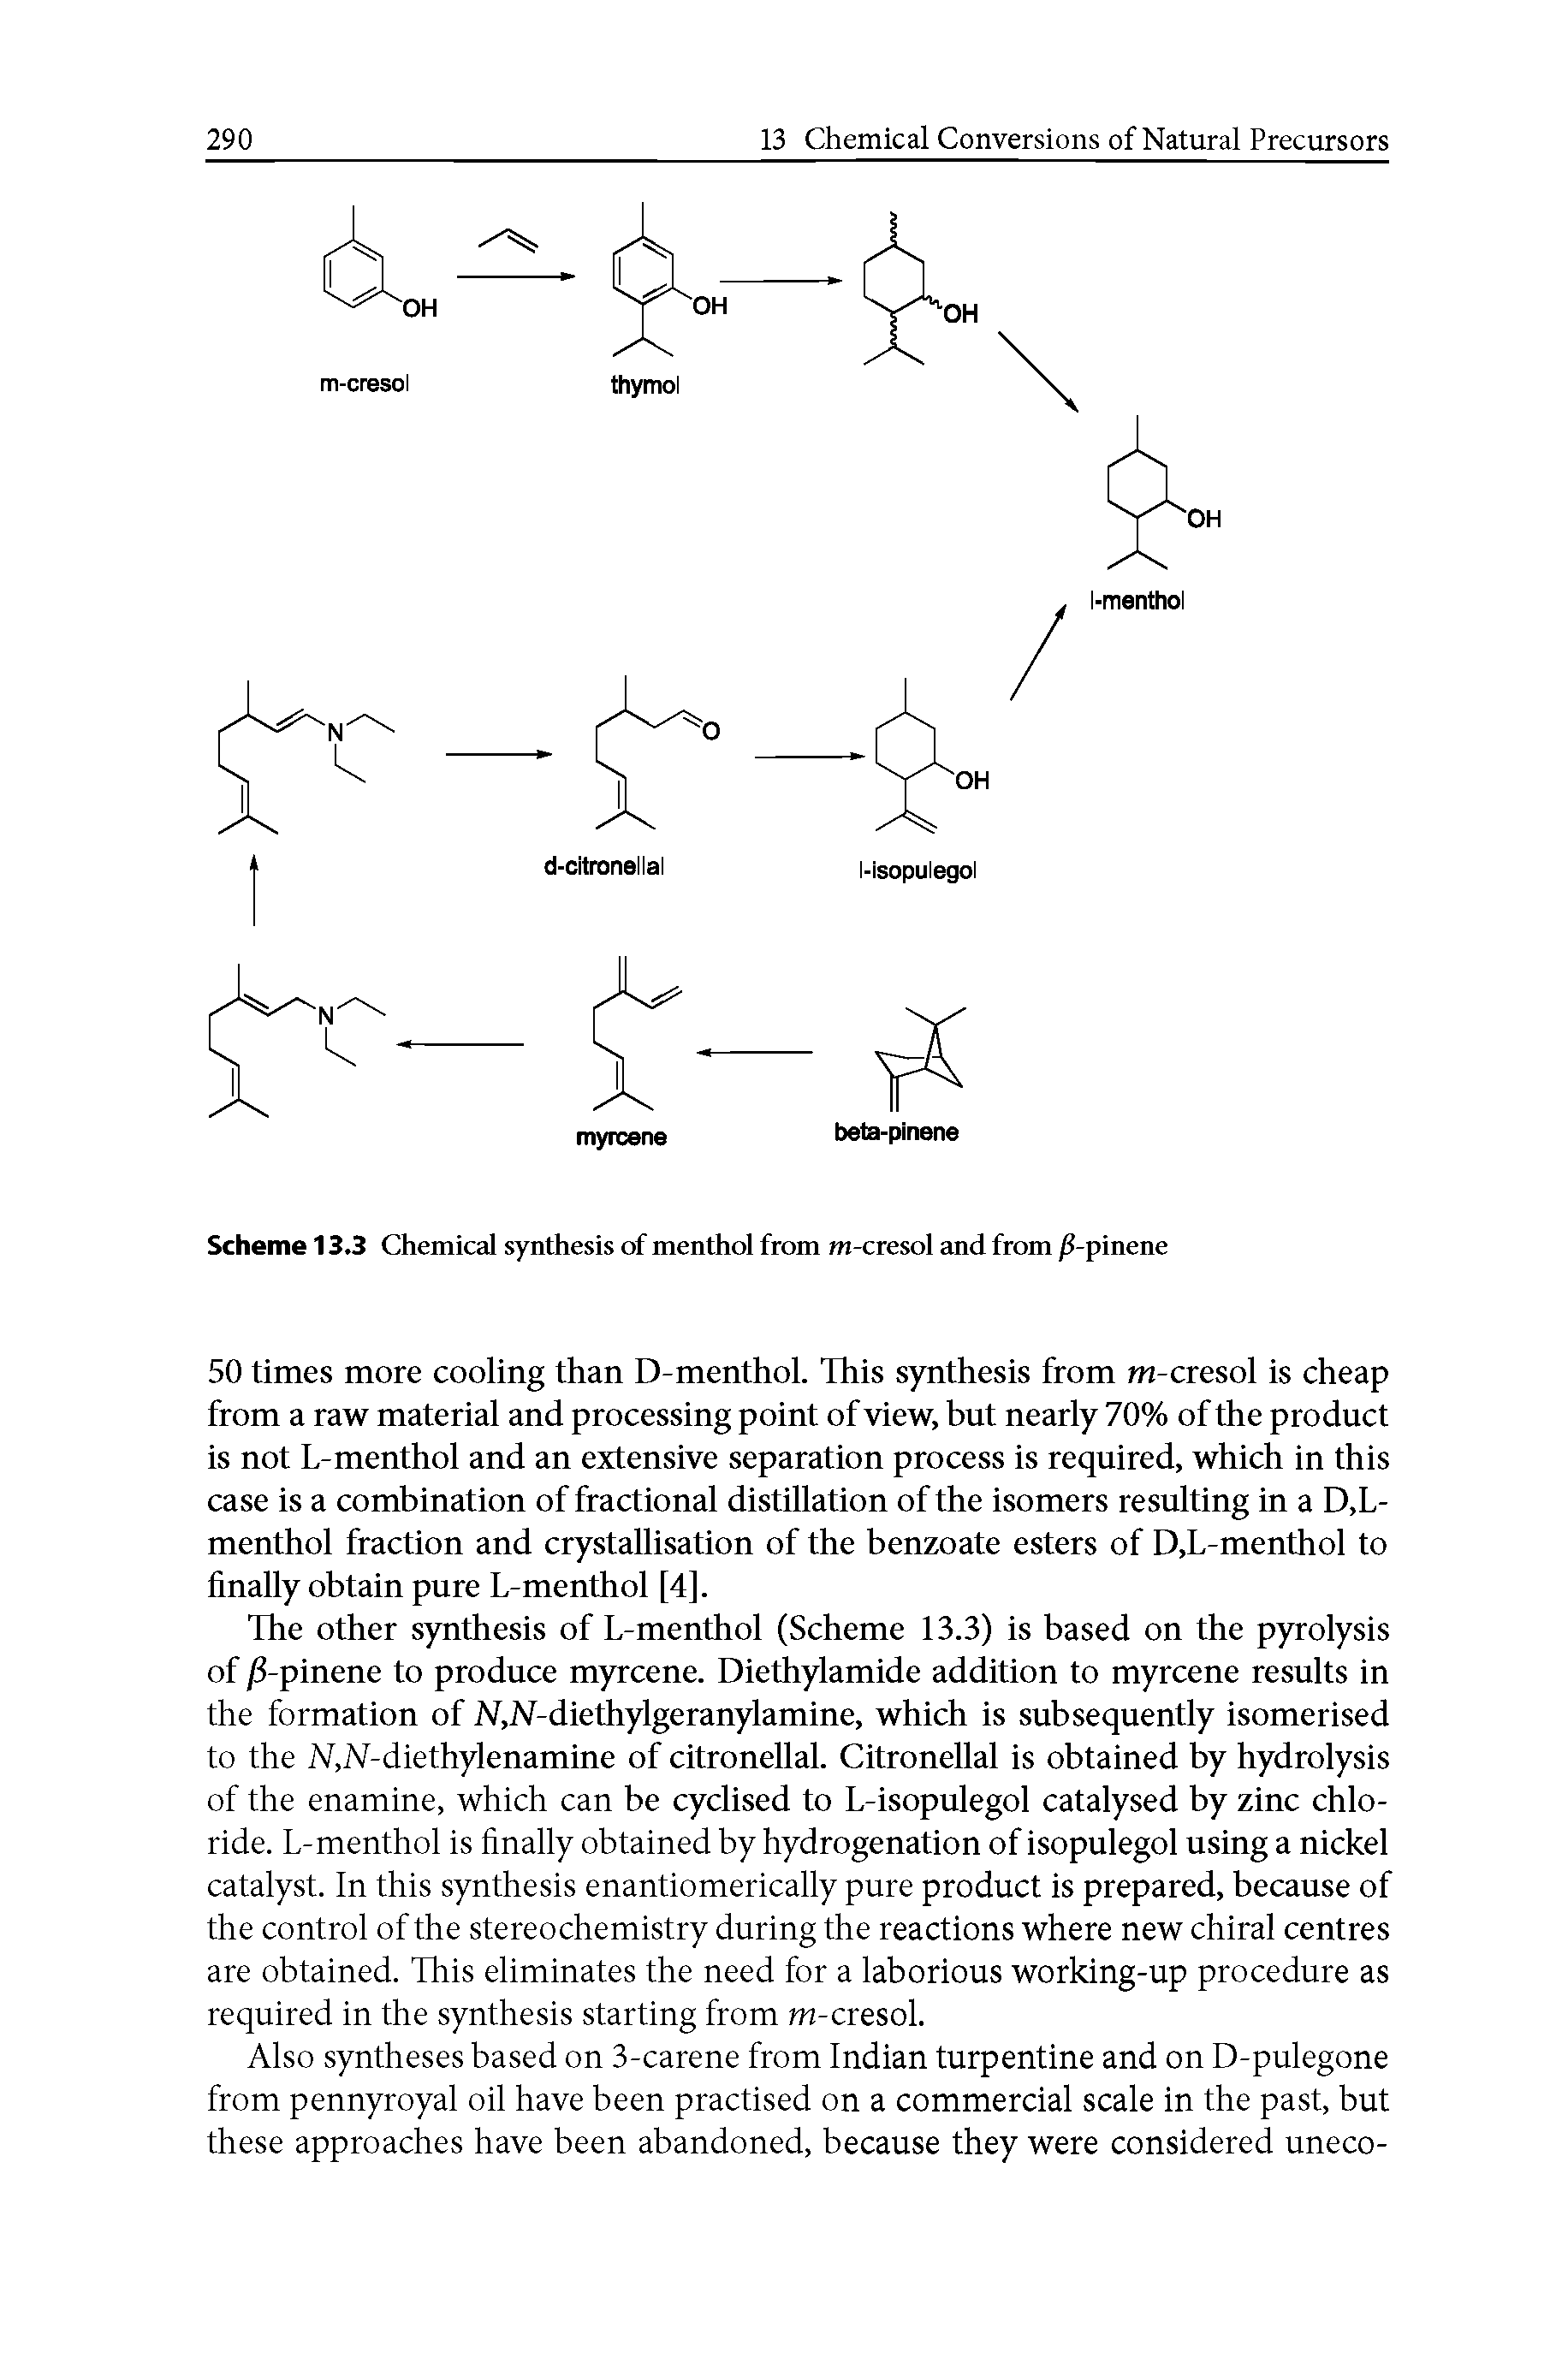 Scheme 13.3 Chemical synthesis of menthol from m-cresol and from -pinene...